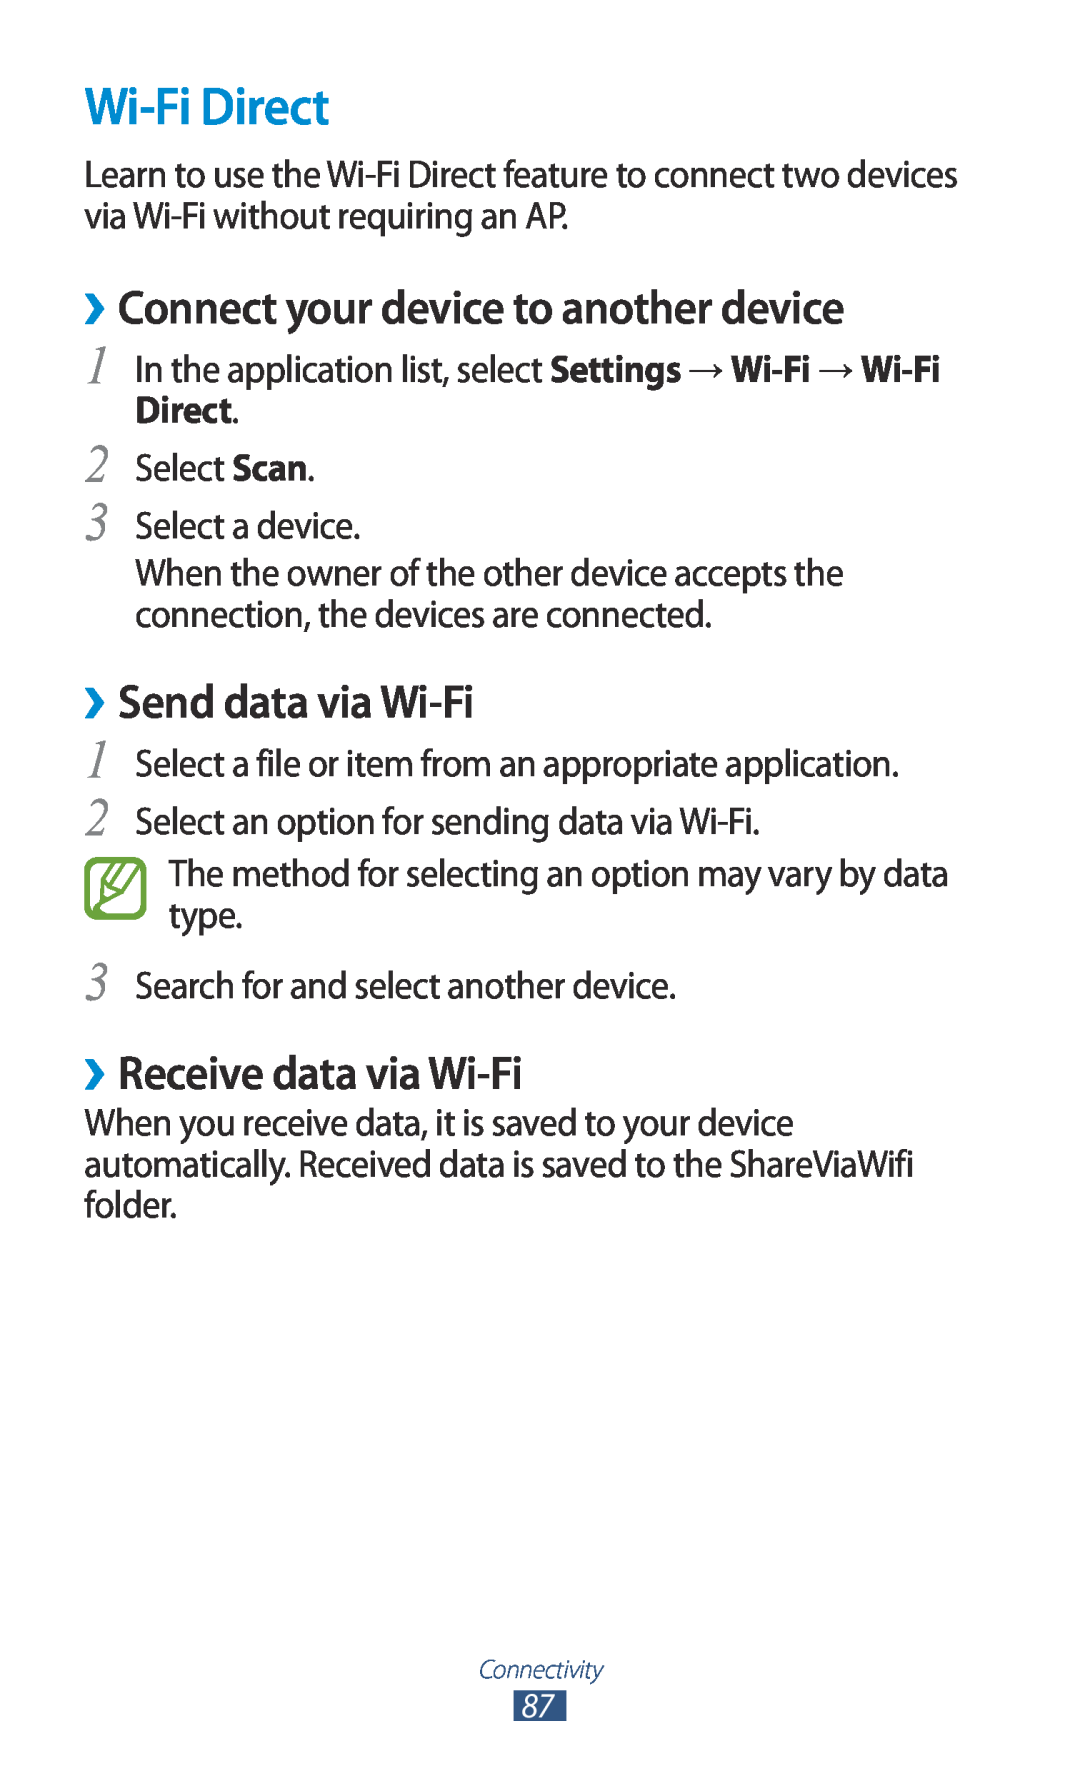 Samsung GTP5110ZWMTTT manual Wi-Fi Direct, ››Connect your device to another device, ››Send data via Wi-Fi 